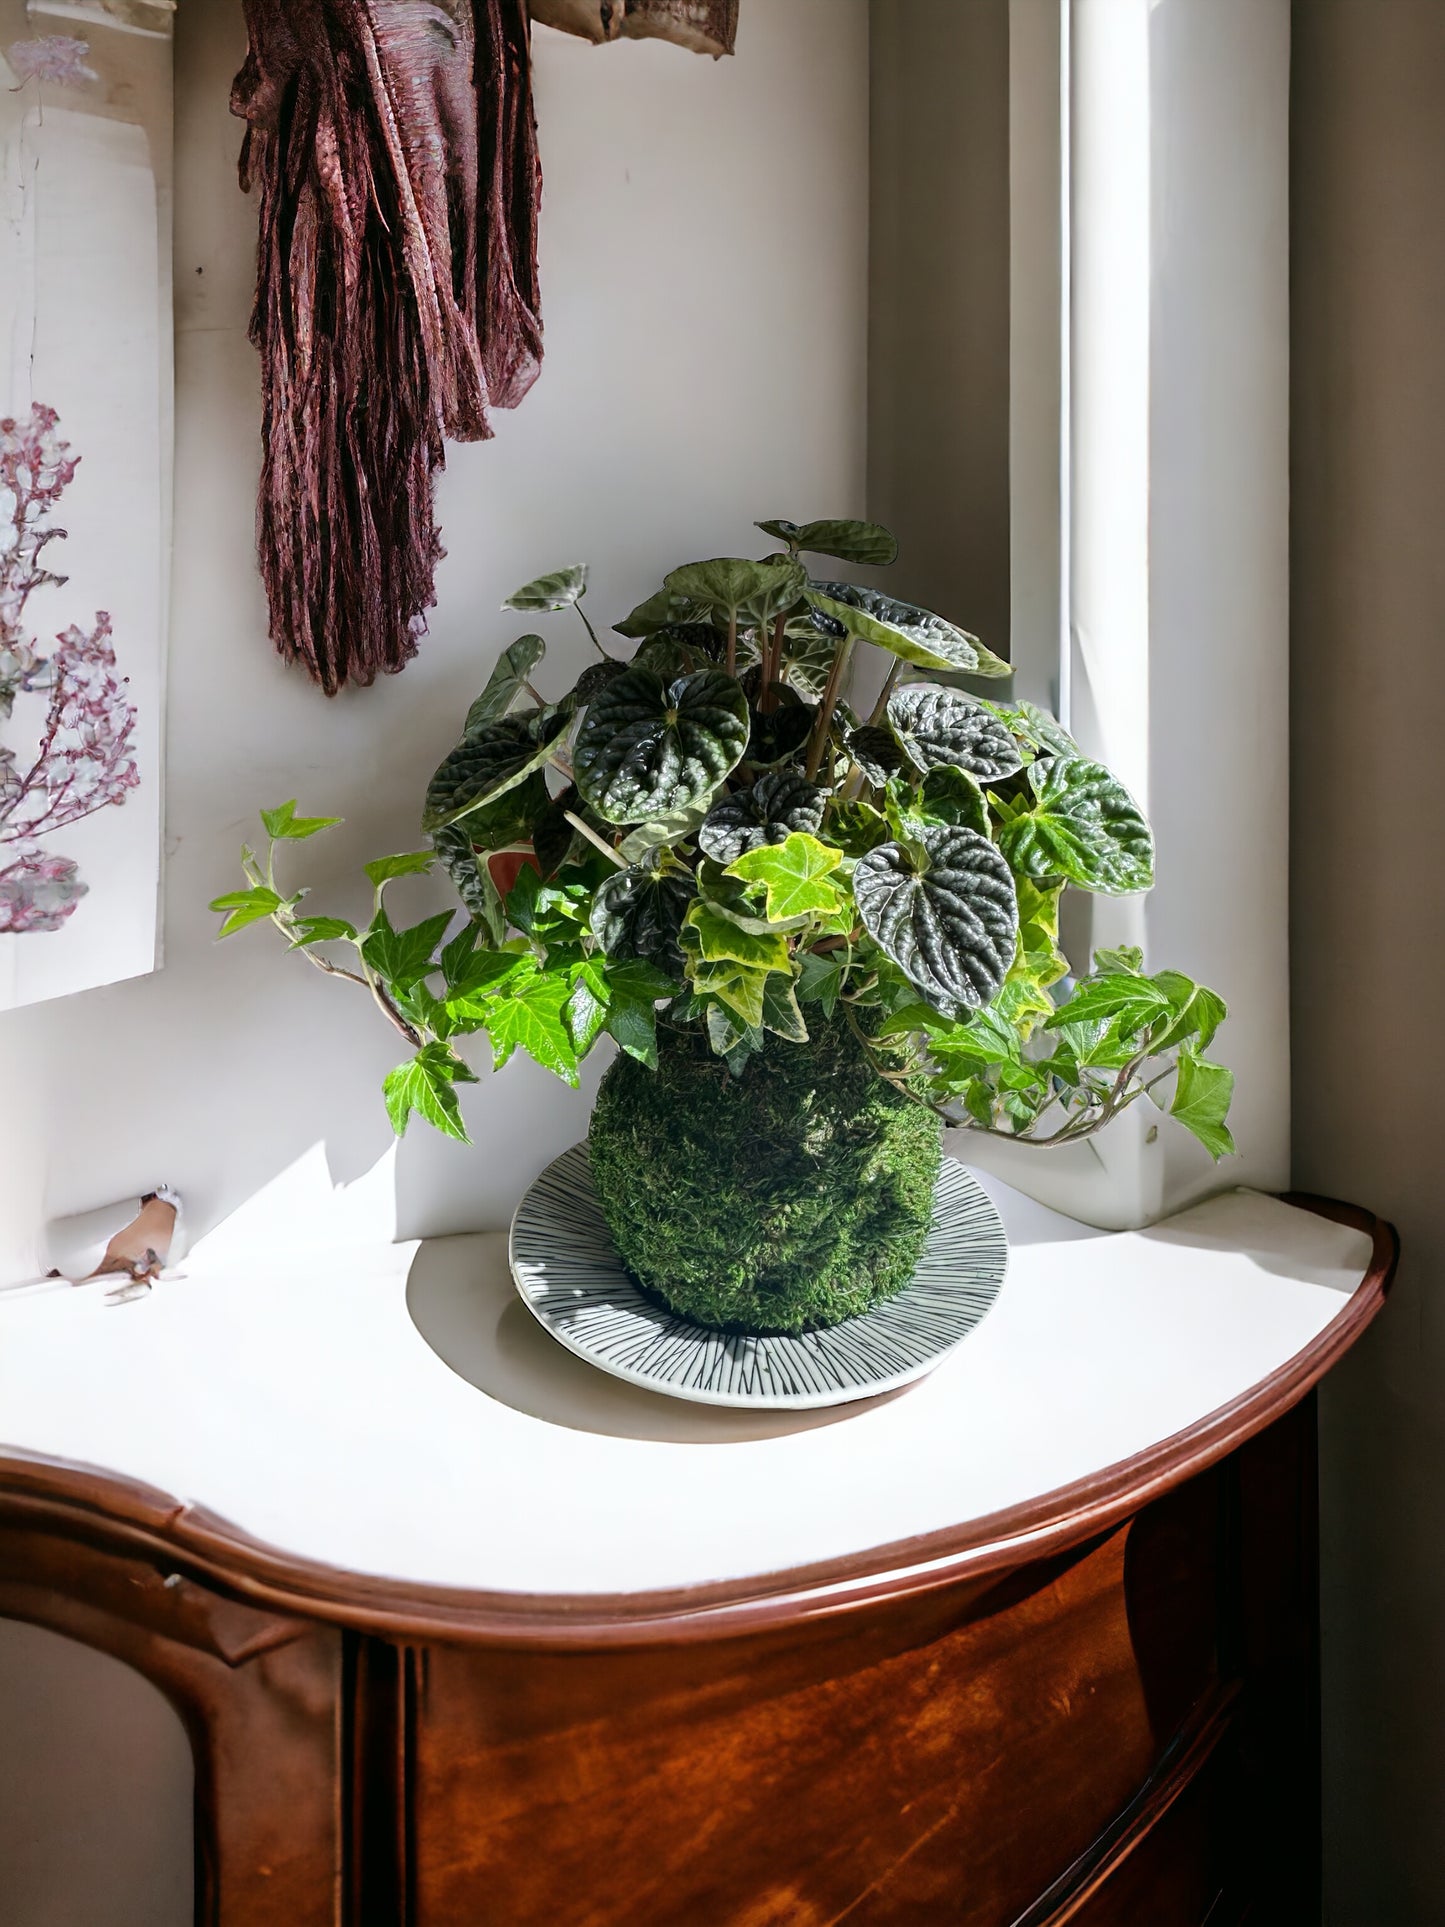 Ripple peperomia and ivy arranged Kokedama - Moss ball, Japanese ancient botanical technique.